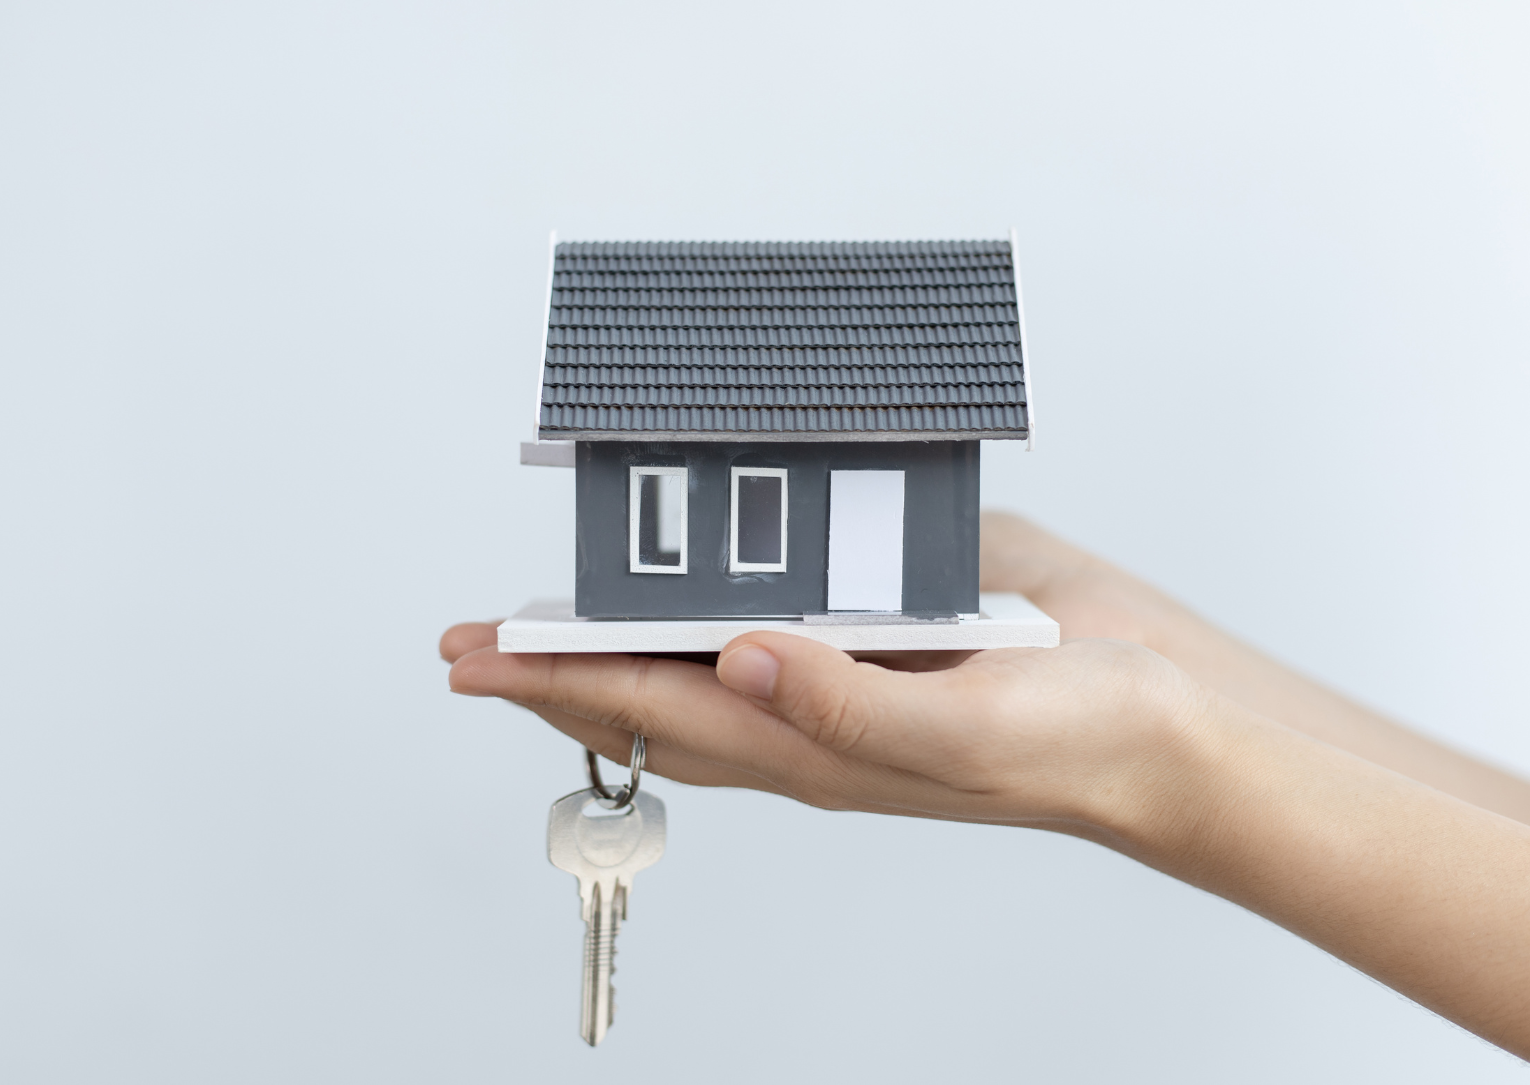 Small house in palm of hand with key